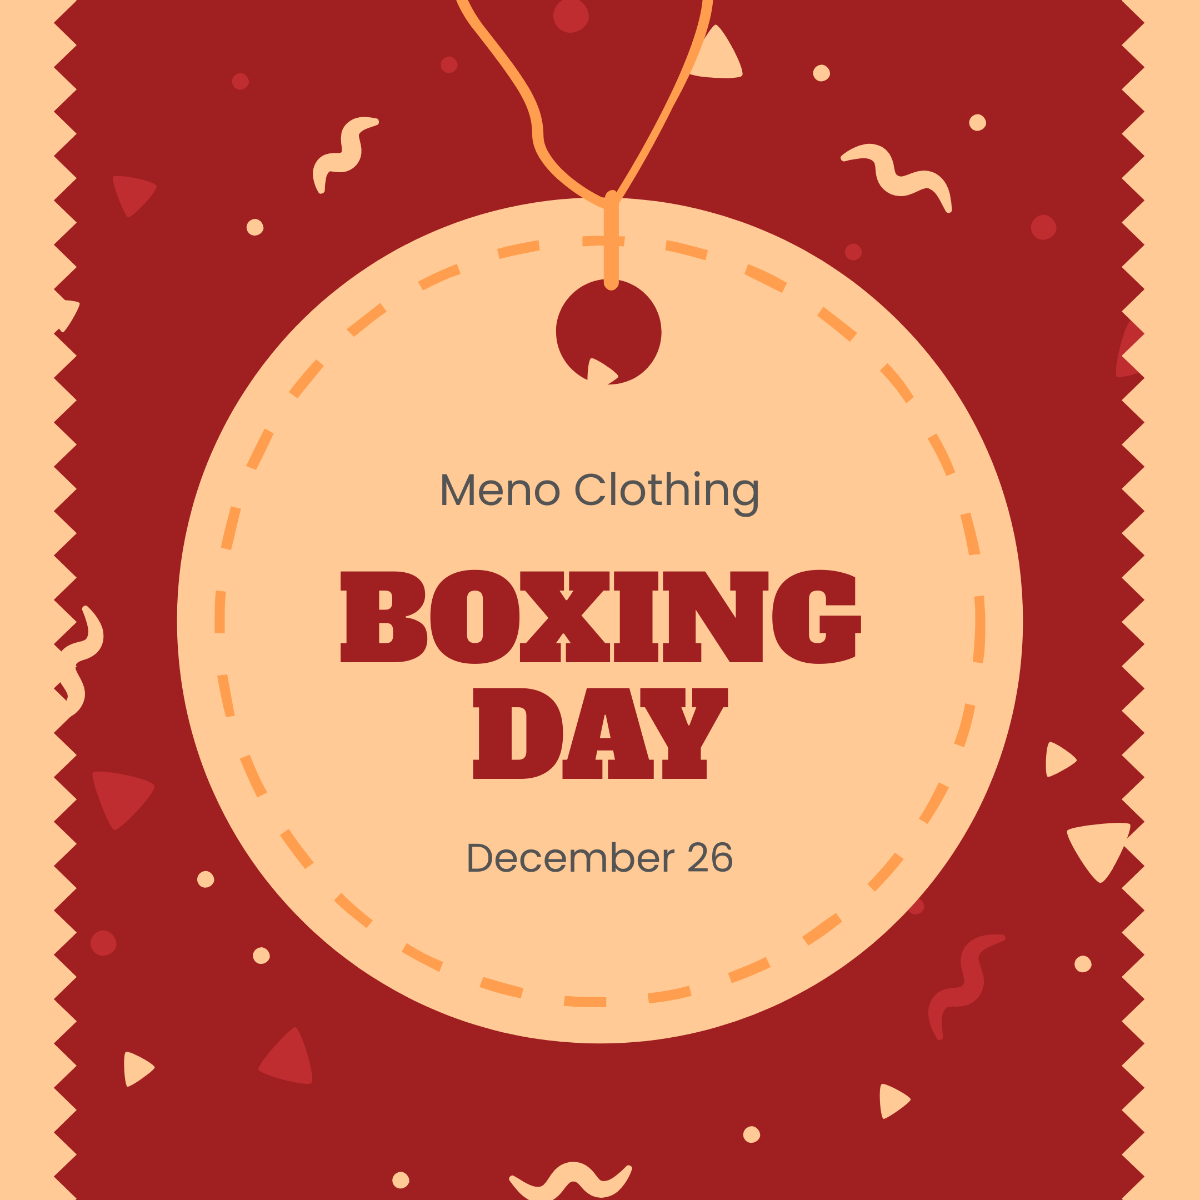 Retro Boxing Day Instagram Post Template